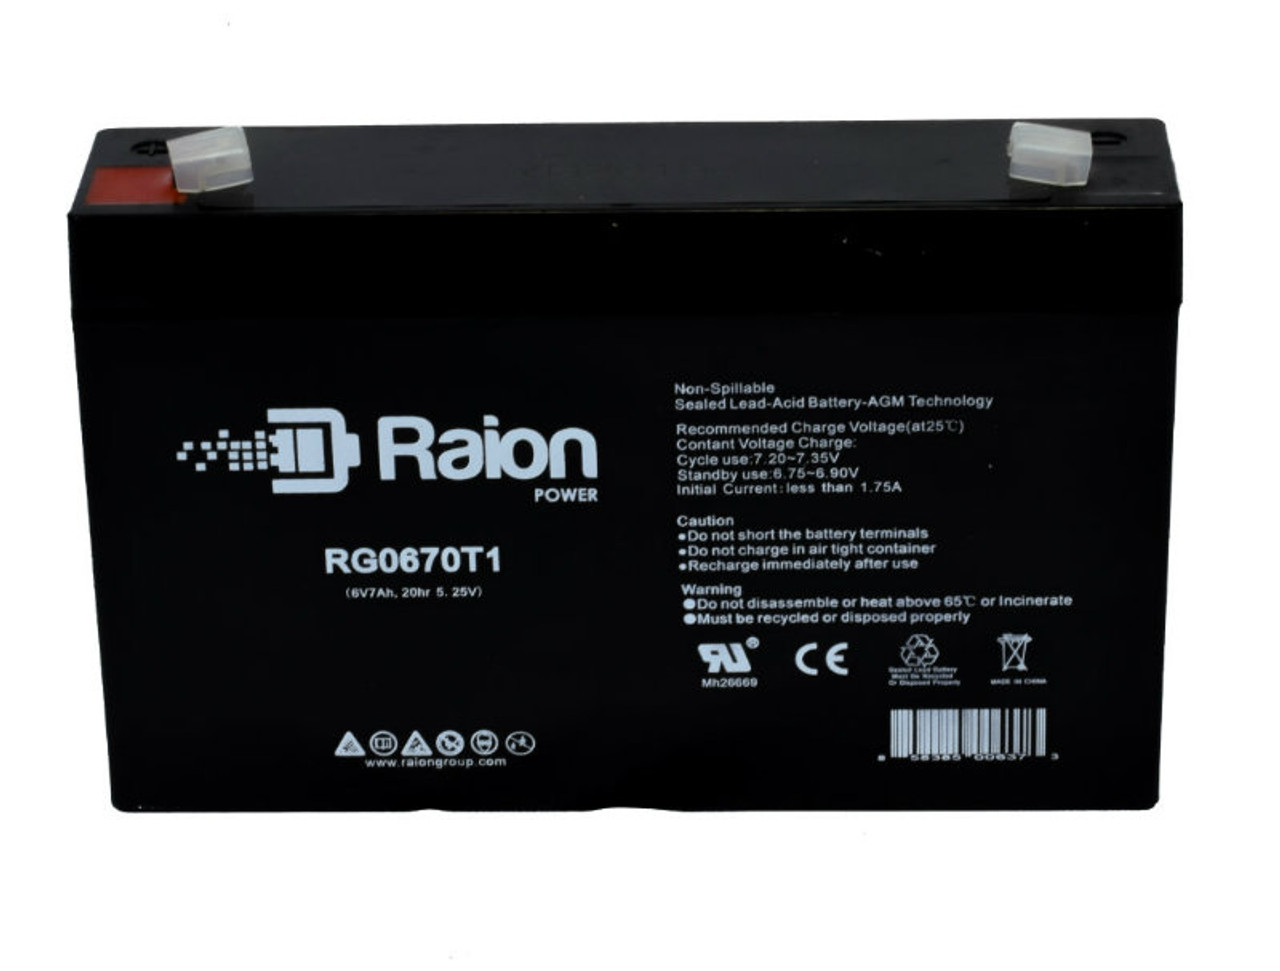 Raion Power RG0670T1 Replacement Battery Cartridge for Ivy Biomedical System 702 ECG MONITOR